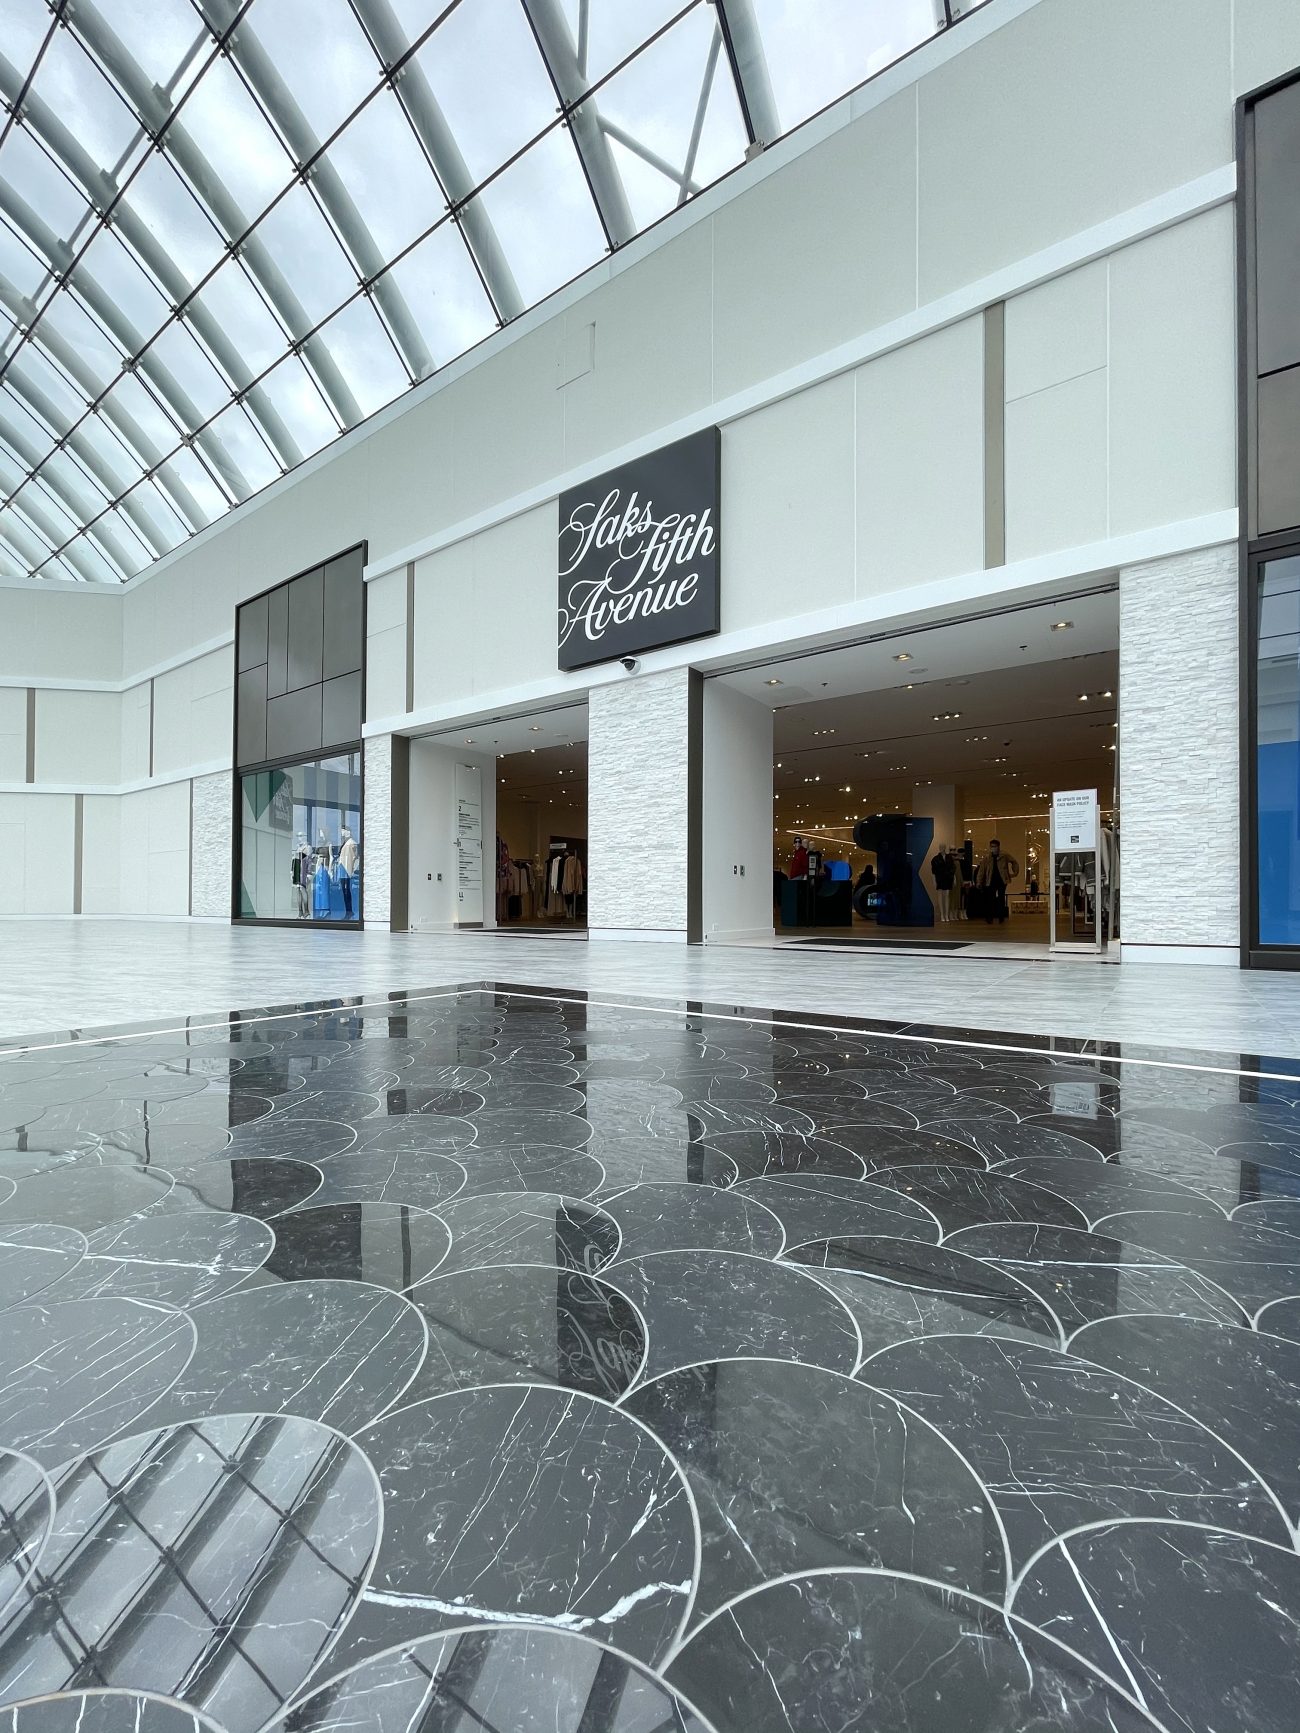 SAKS FIFTH AVENUE - 19 Photos & 11 Reviews - 1 American Dream Wy, East  Rutherford, New Jersey - Department Stores - Yelp